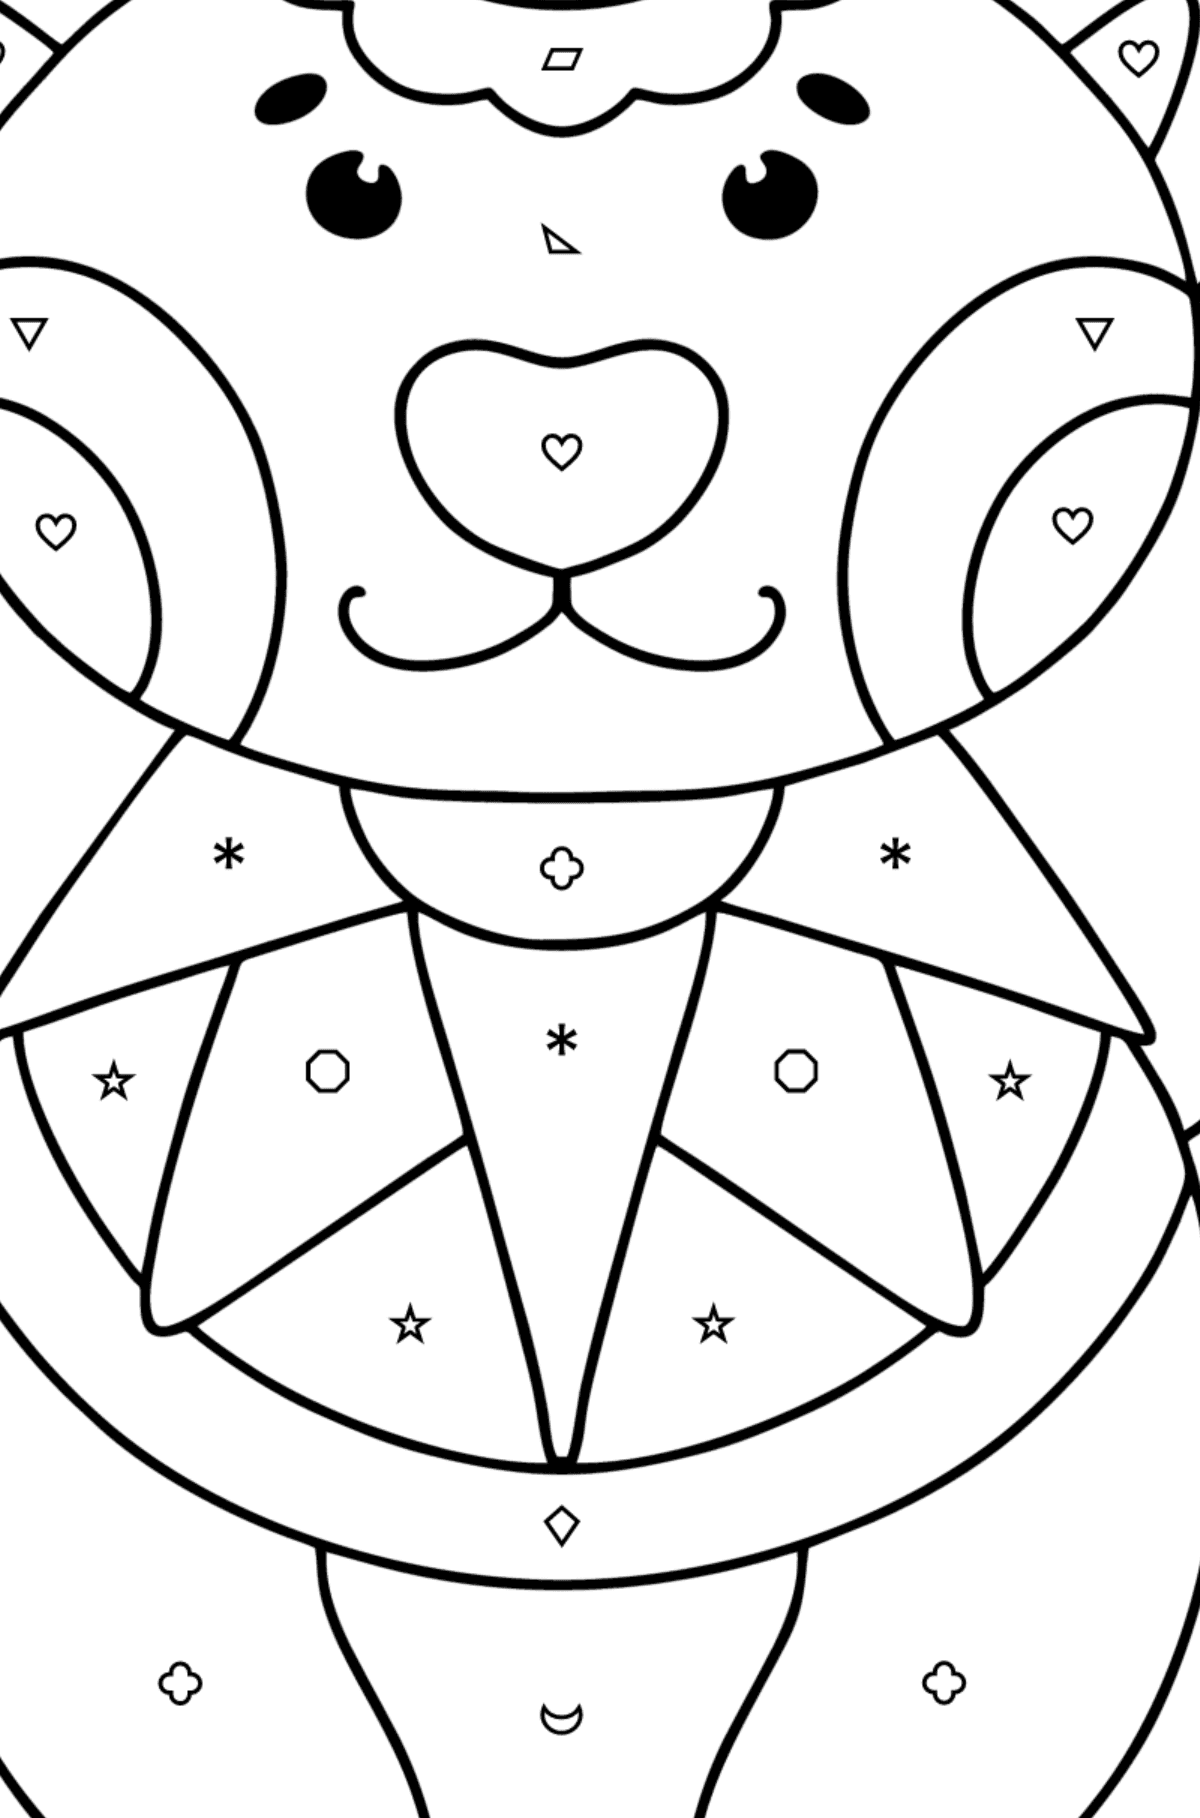 Anti stress Cat coloring page - Coloring by Symbols and Geometric Shapes for Kids